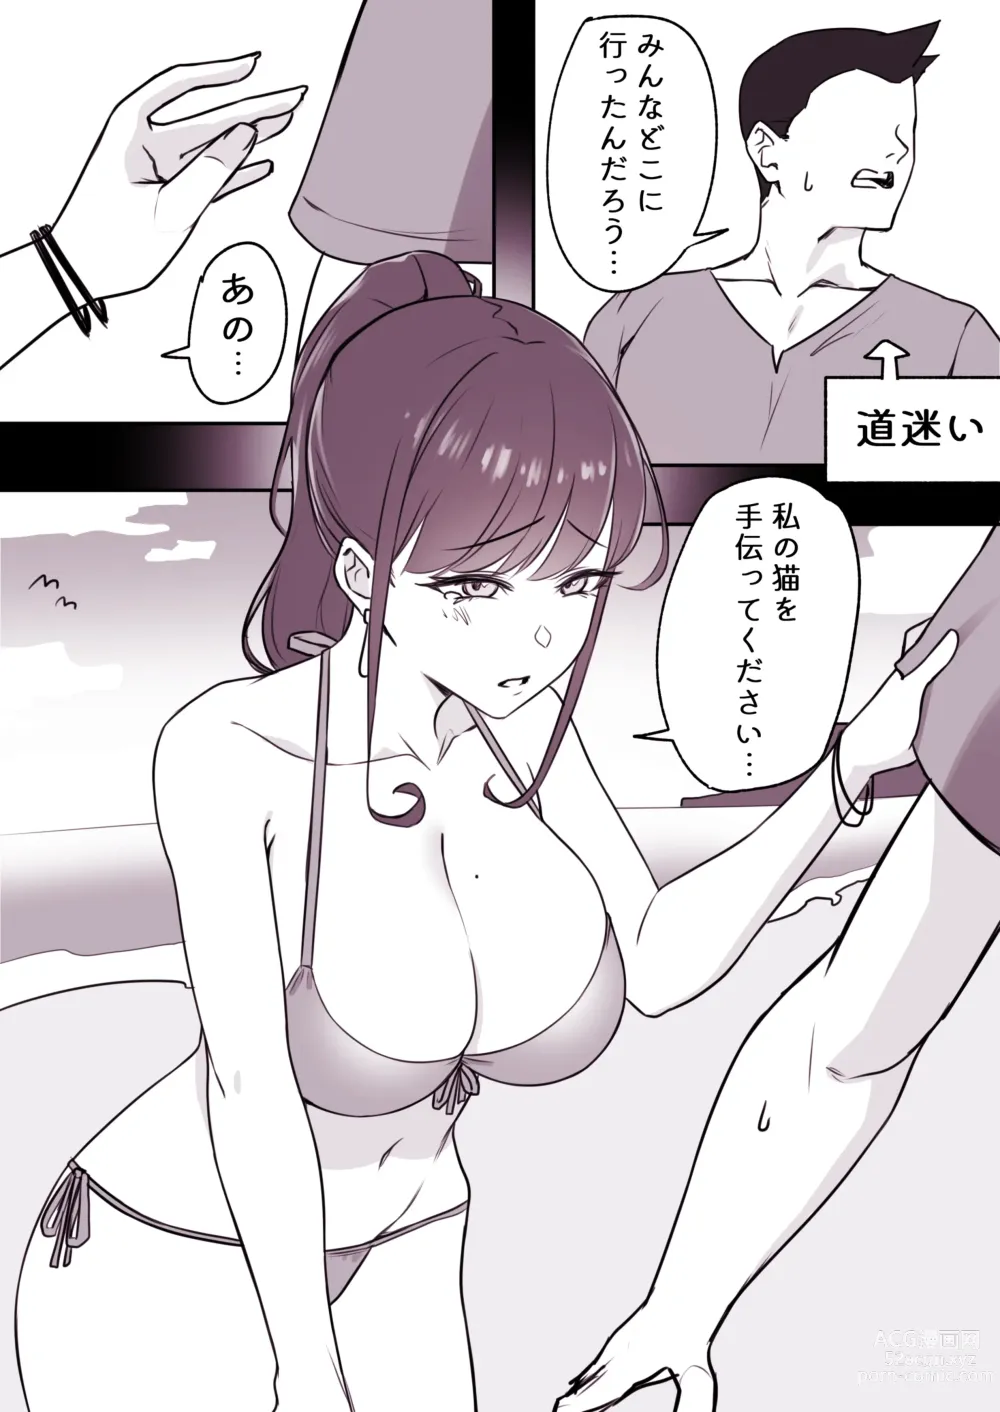 Page 1 of doujinshi What happens on the seaside